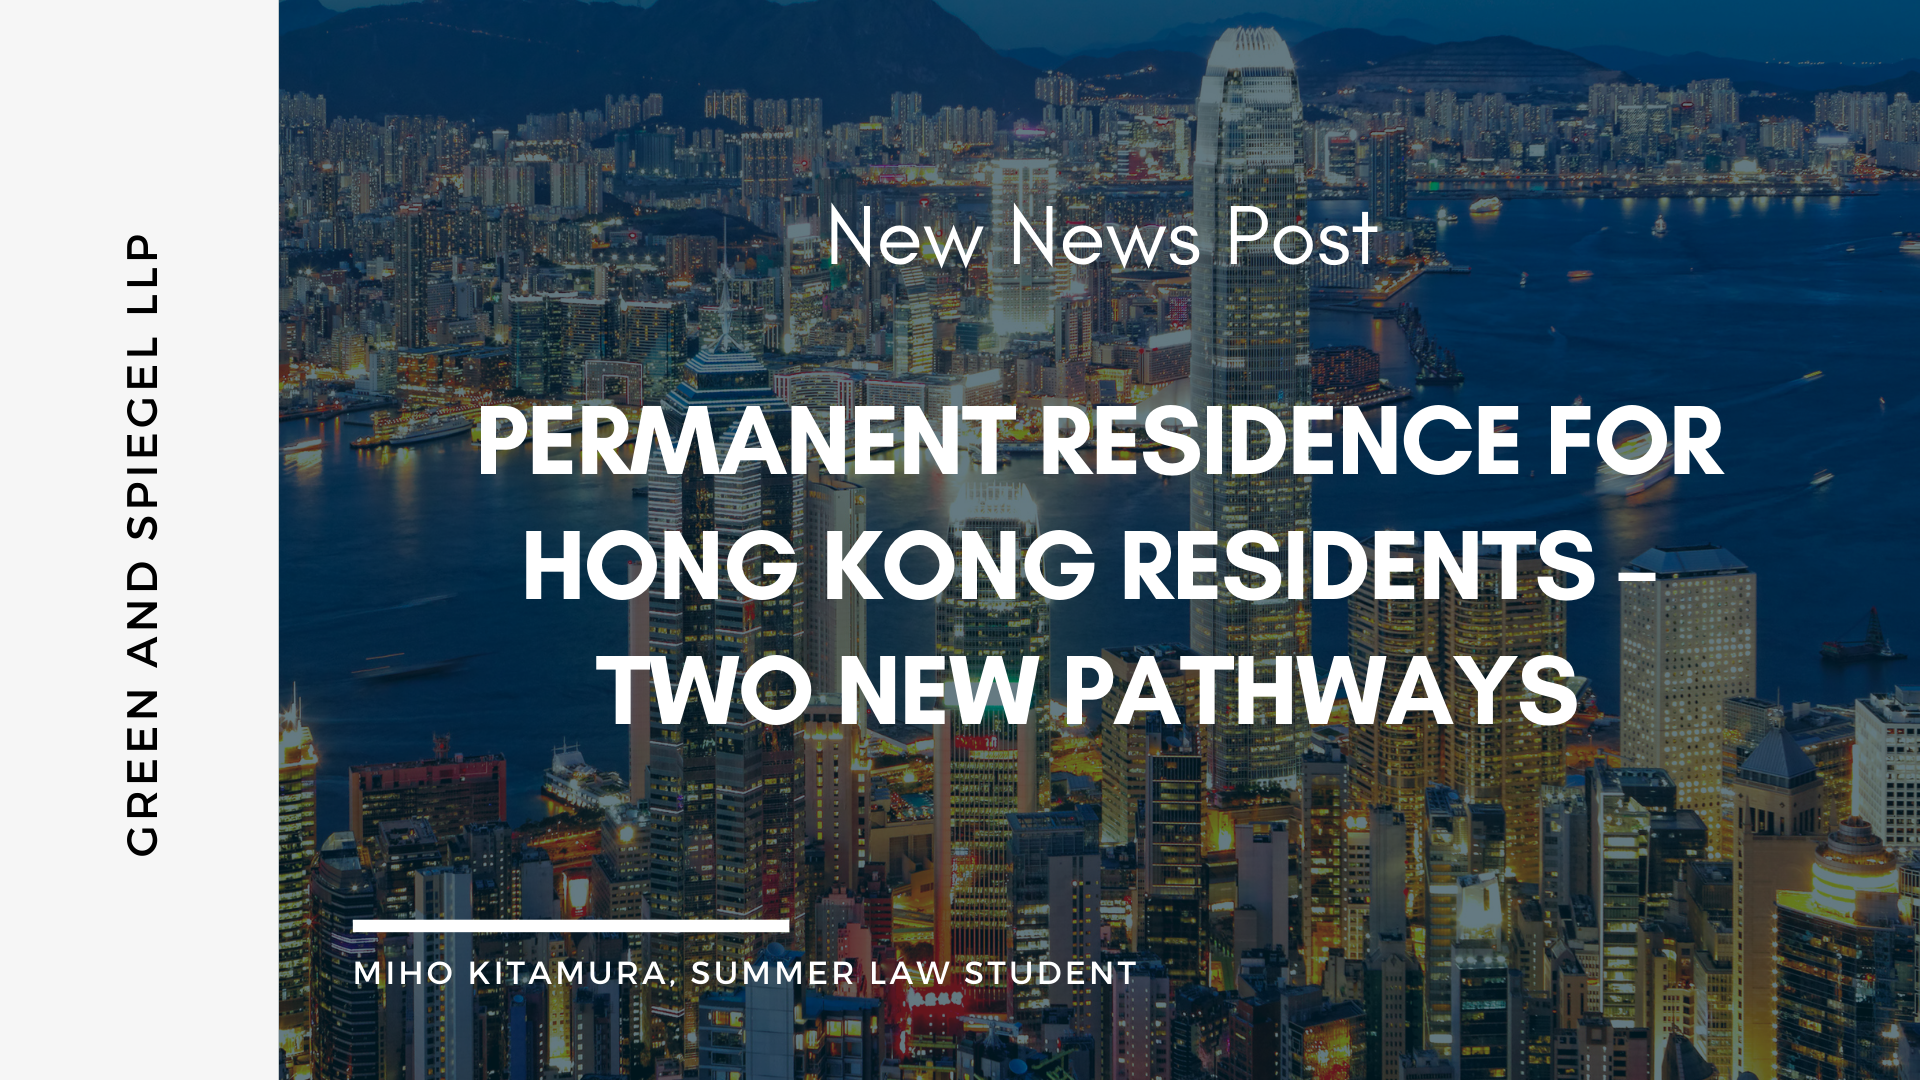 PERMANENT RESIDENCE FOR HONG KONG RESIDENTS – TWO NEW PATHWAYS